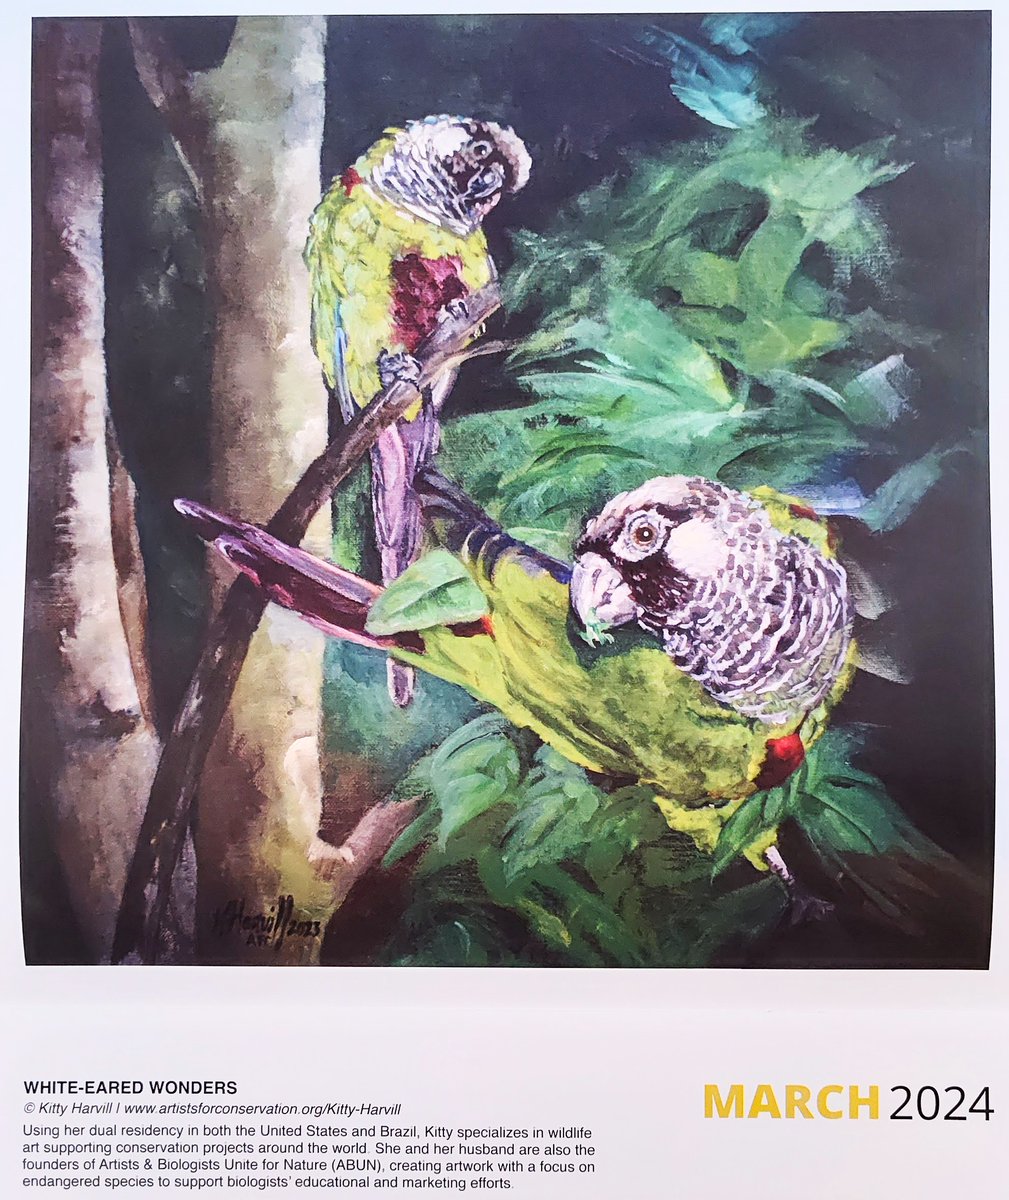 Time for March #ParrotCalendarOfTheMonth! First up are these beautiful white-eared parakeets (AKA maroon -faced) by Kitty Harvill in the World Parrot Trust art calendar. Found in Eastern Brazil, they are considered near-threatened. @ParrotTrust @desi_milpacher